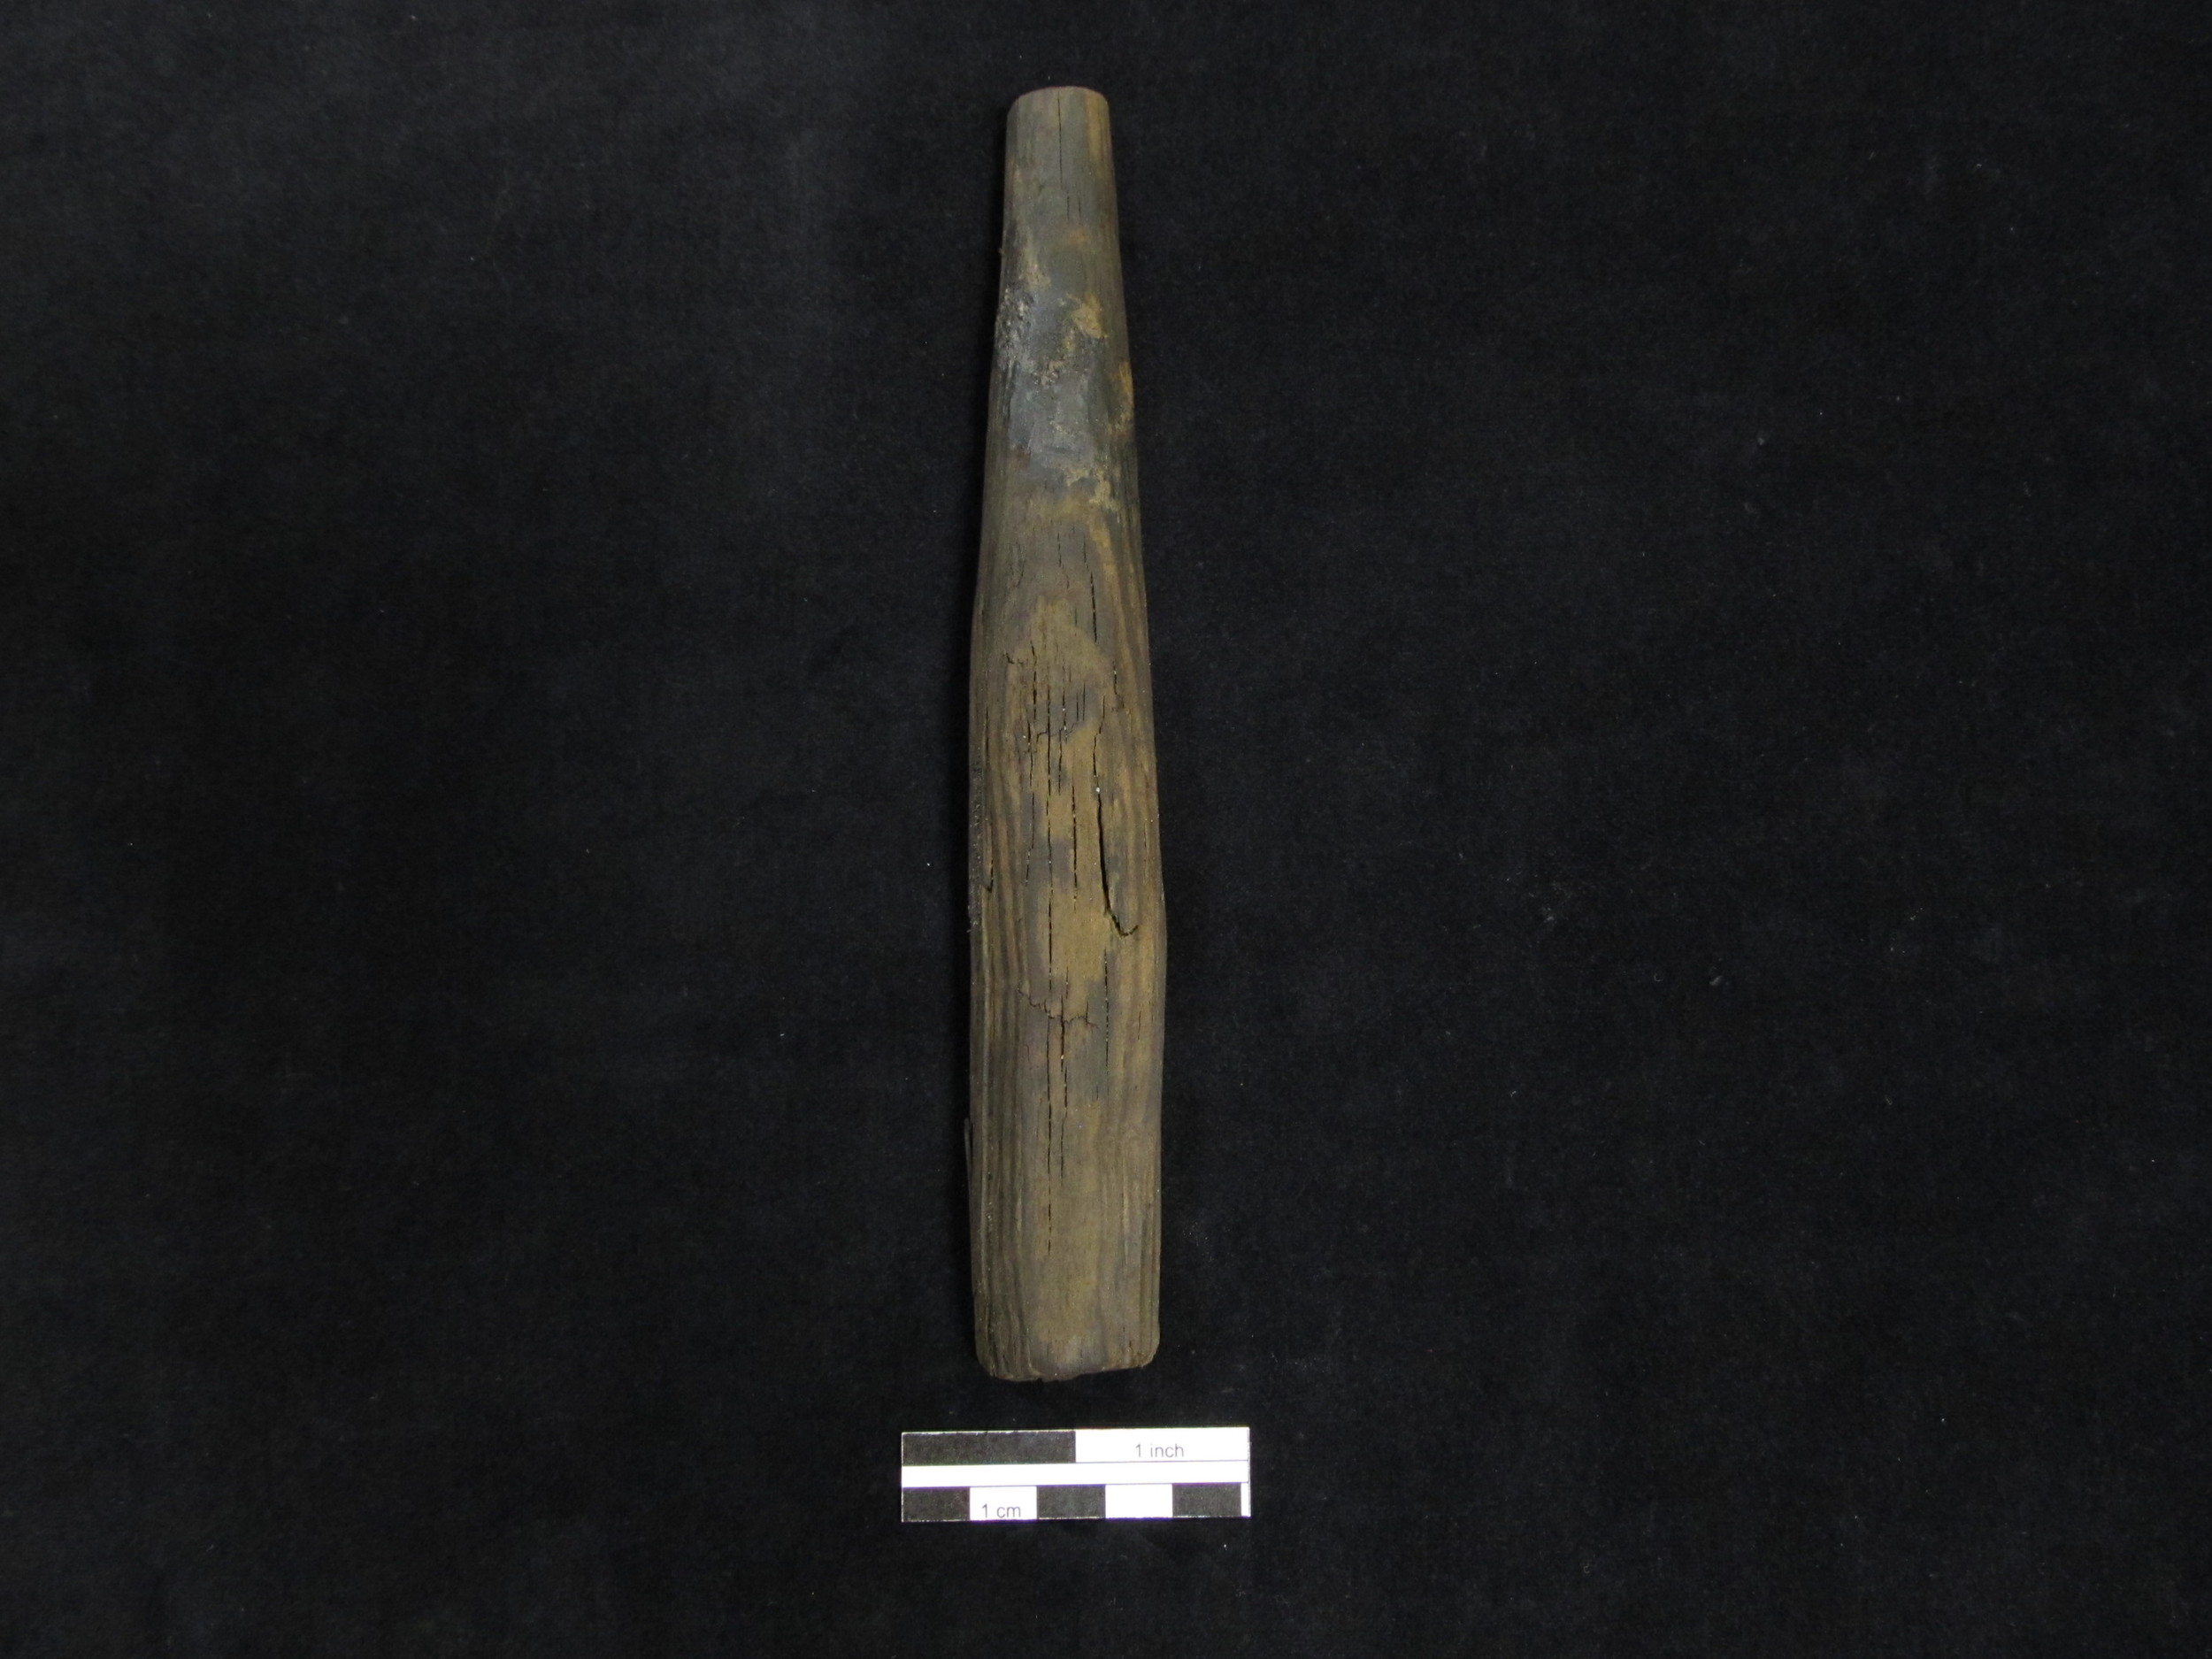  Wooden hammer handle fragment recovered from the Carlyle warehouse.    